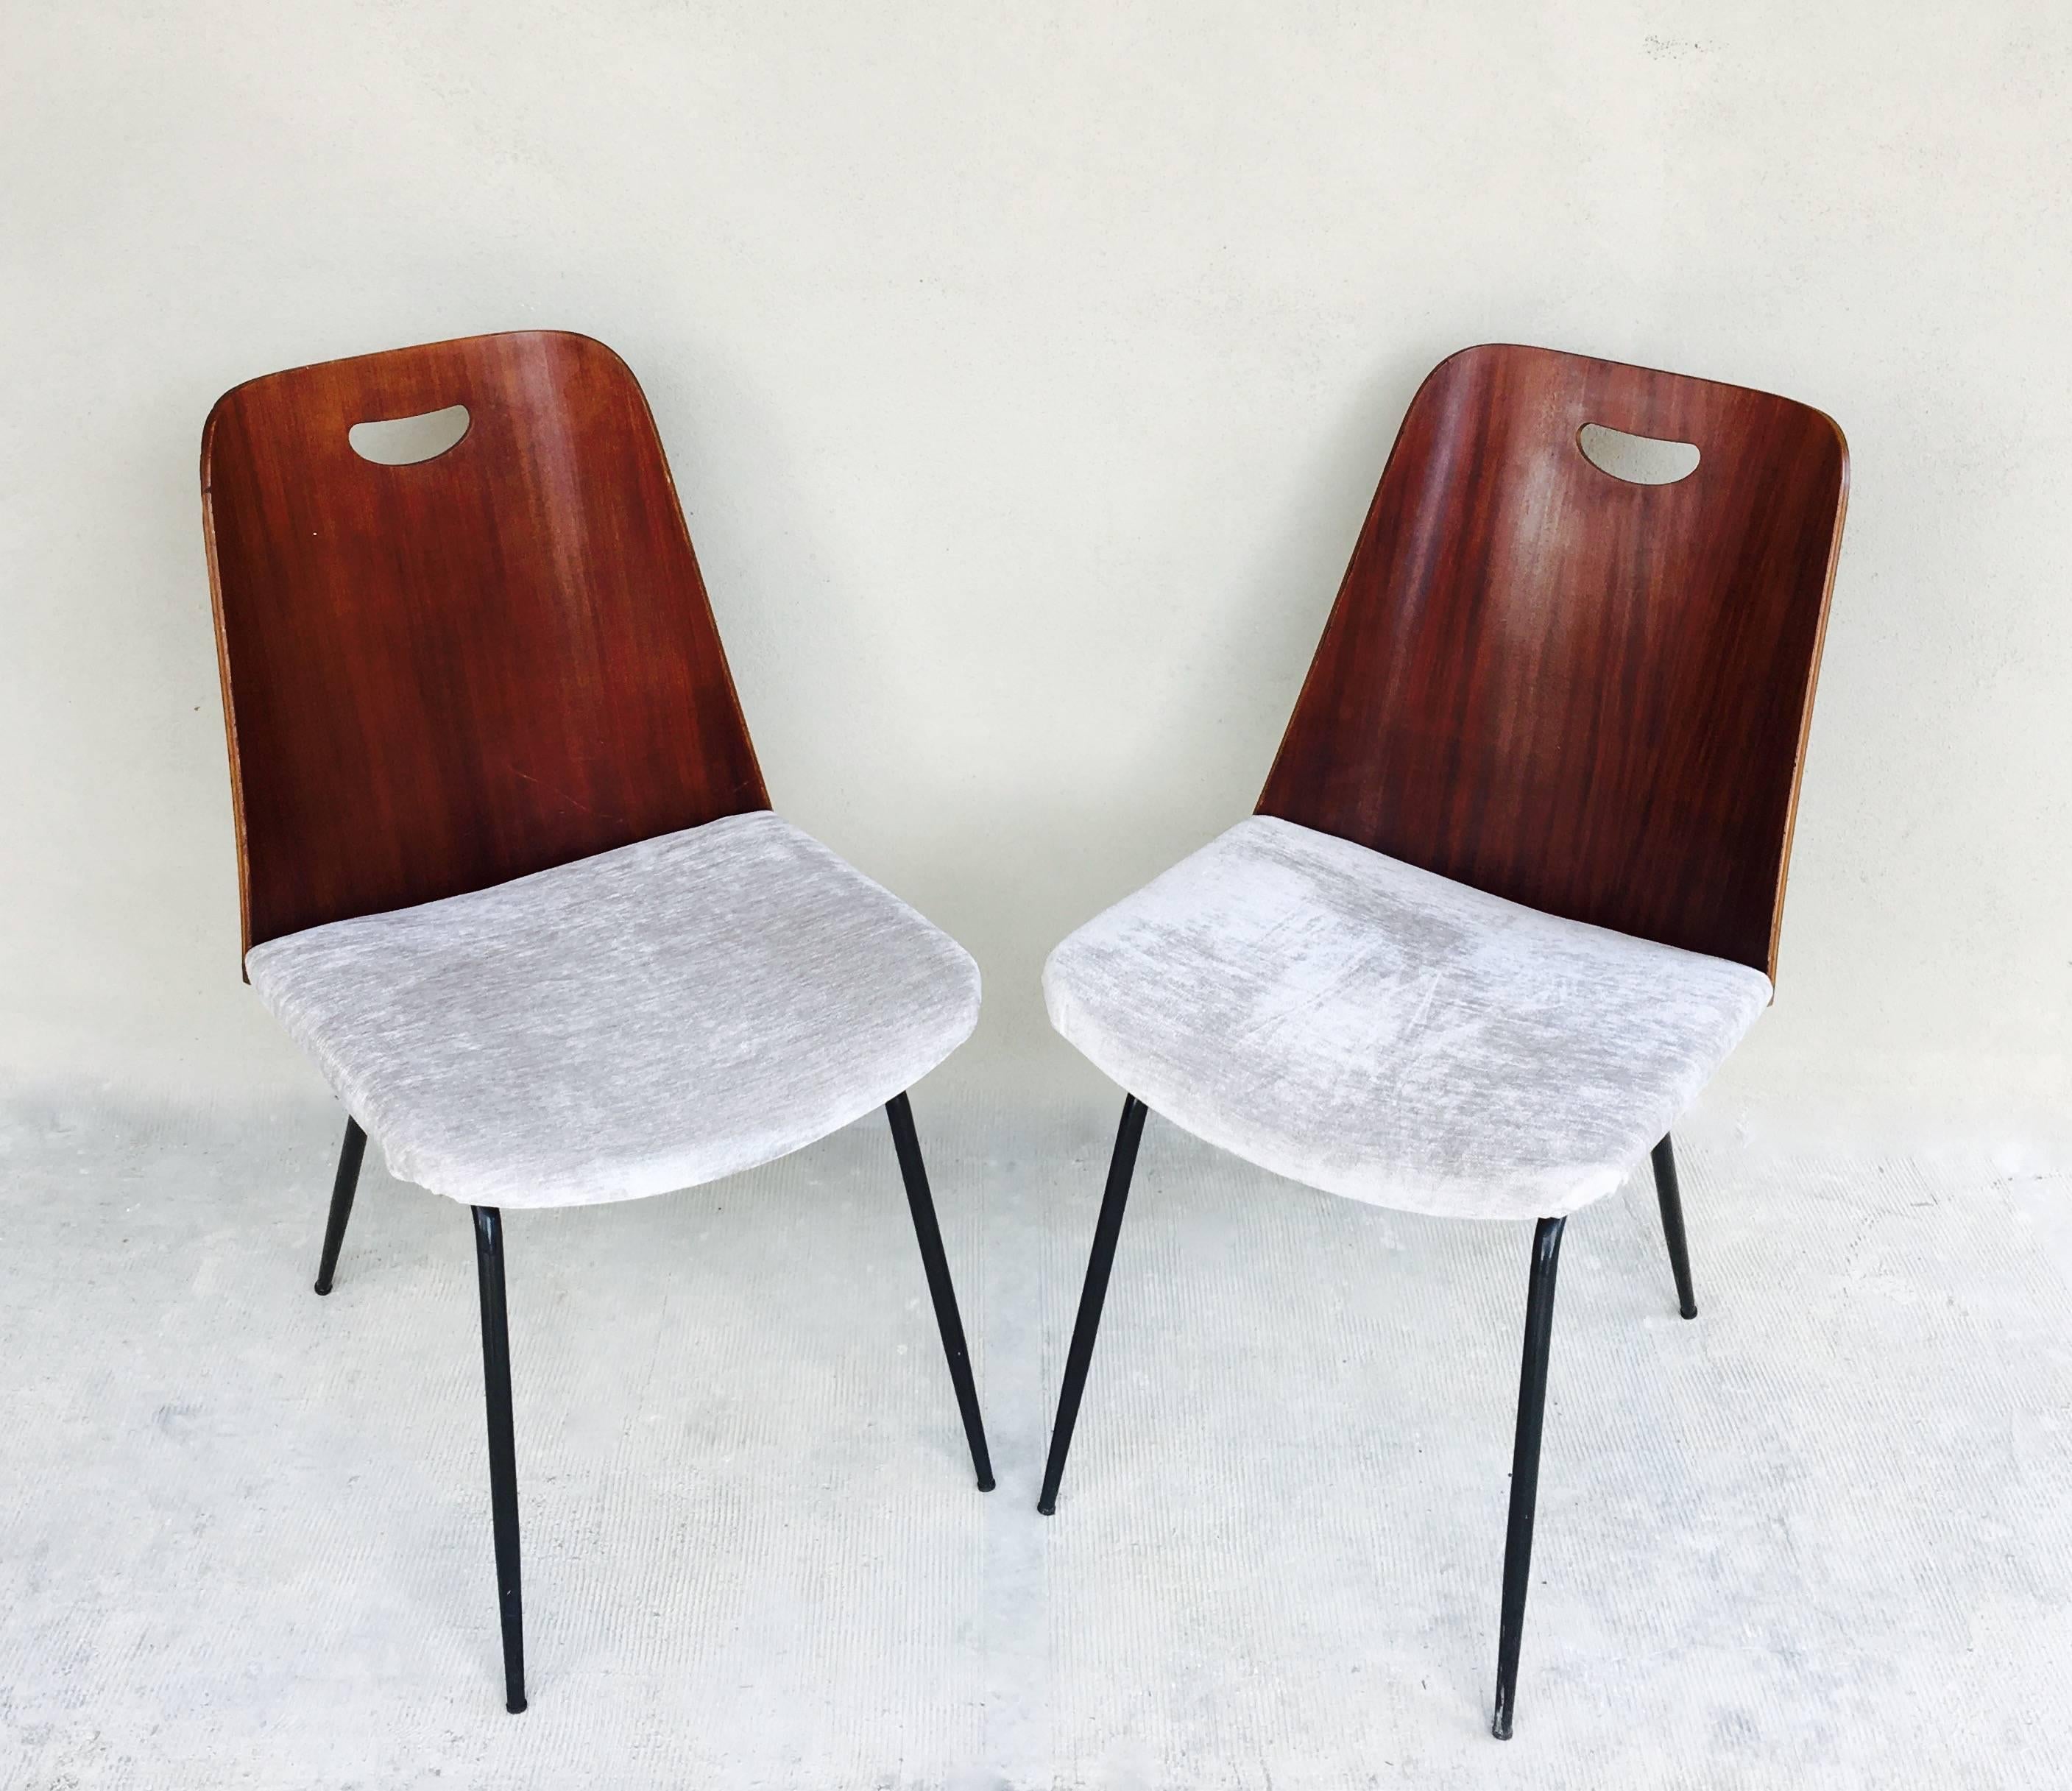 A pair of Du22 chairs by Gastone Rinaldi for RIMA in plywood and upholstered seat on a black metal base. The model was first presented during the 1951 Fair of Arts and Industrial Aesthetics in Milan. Published in "Gaston Rinaldi, Designer at